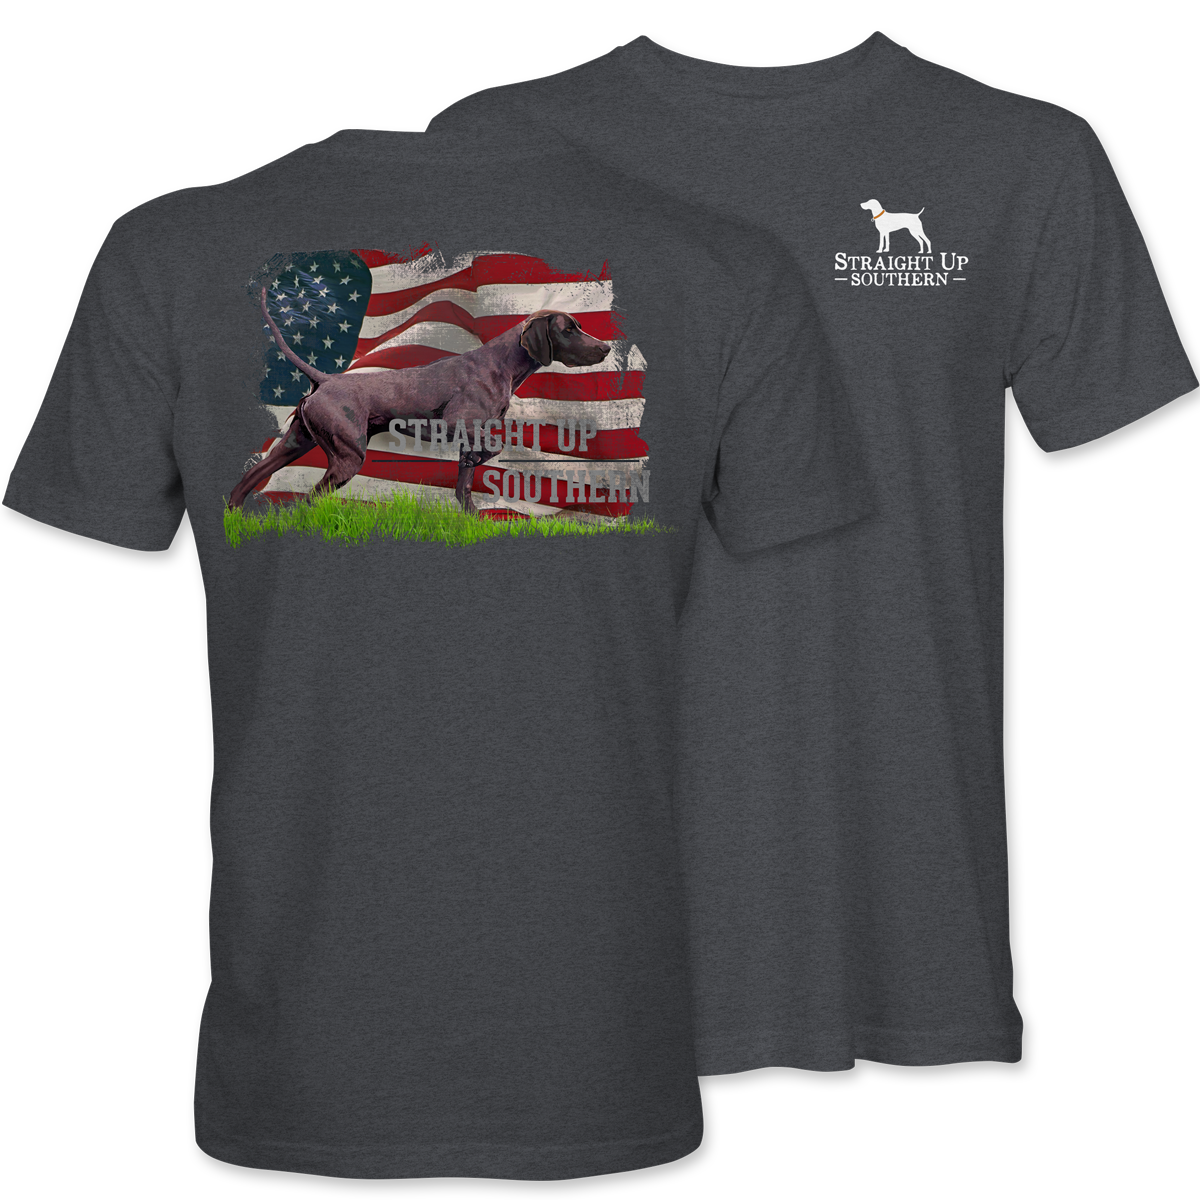 The Point - German Shorthaired Pointer with American Flag Background Tee